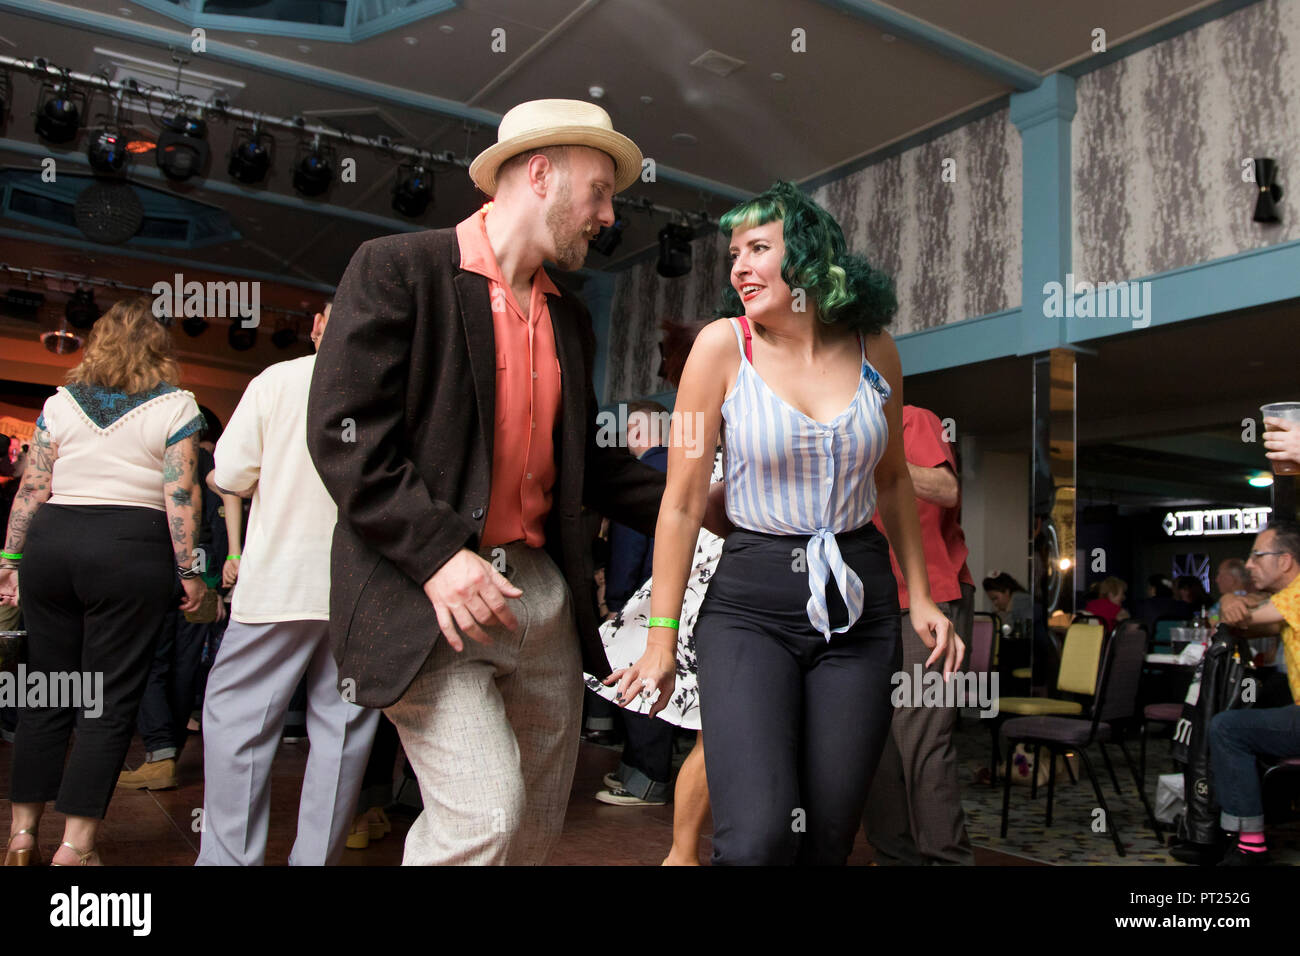 Norfolk, UK. 5 October 2018.  Rock 'n' Roll fans, artists and retro traders gather for the last Hemsby Rock 'n' Roll Weekender in Norfolk, England. Rockabilly music, bop and jive dancing, 50s fashion and hairstyles, classic motors and other 1950s Americana converge for the 61st Weekender, the first of the bi-annual festivals being held in 1988. Photo: Adrian Buck / Alamy Live News. Stock Photo